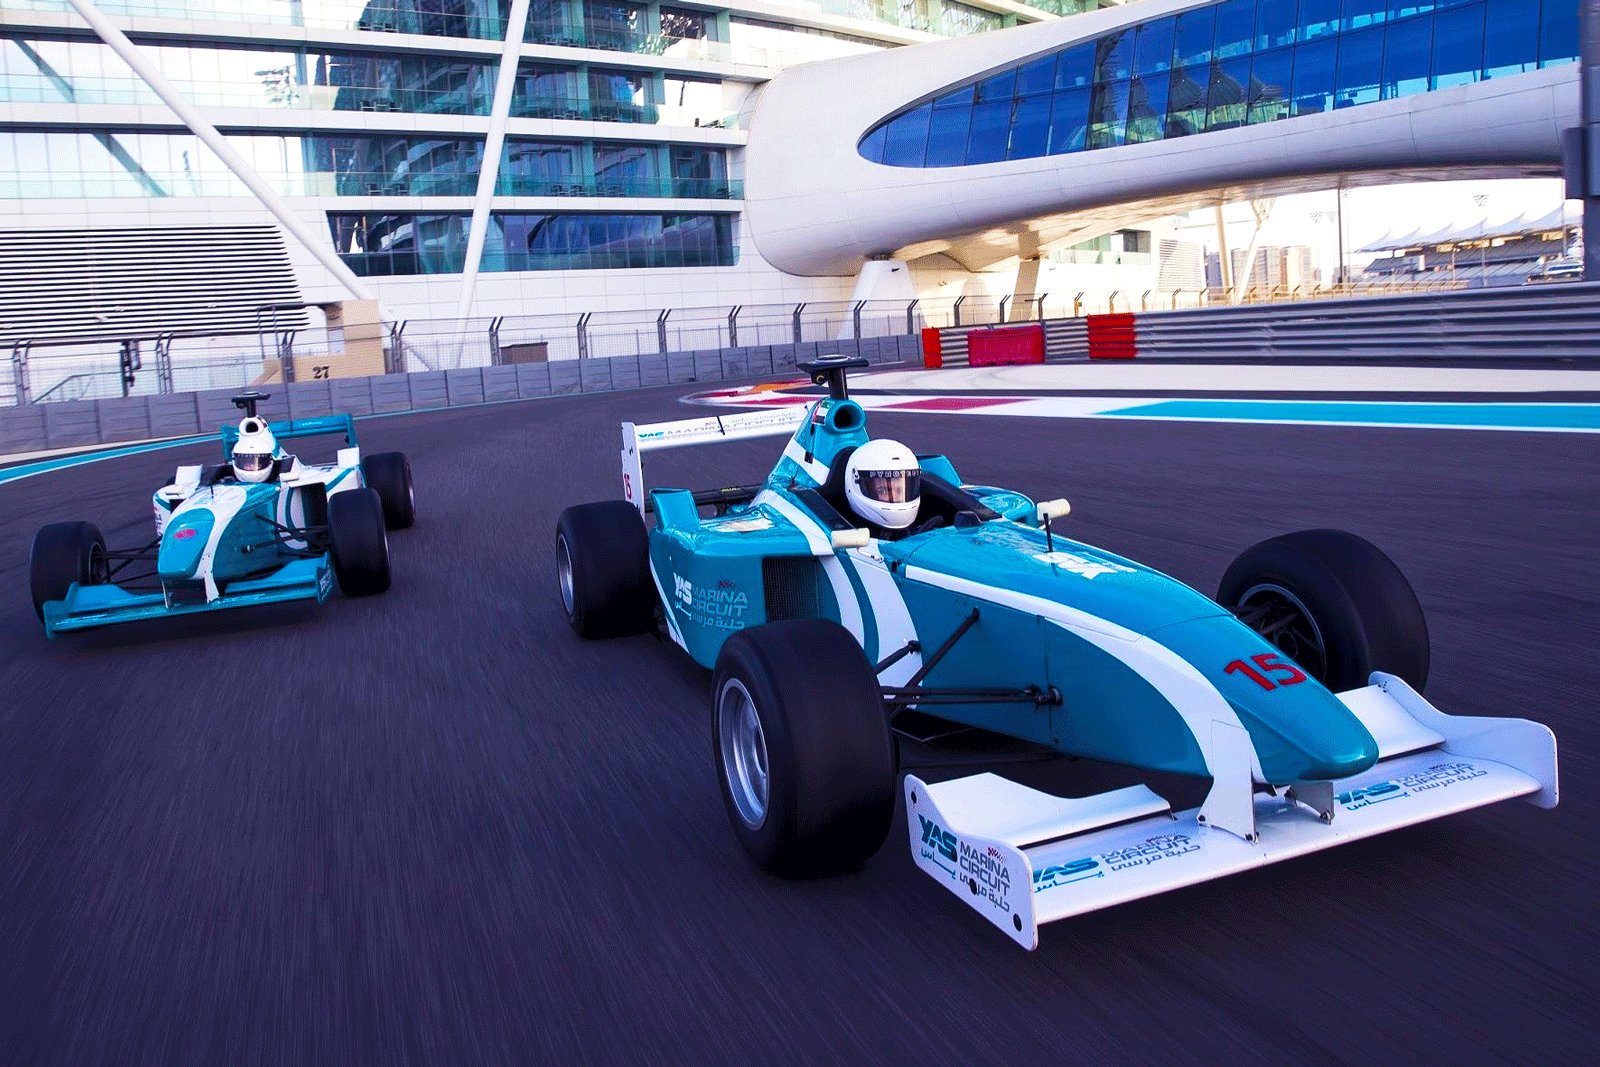 How to drive a race car along the Formula 1 circuit in Abu Dhabi